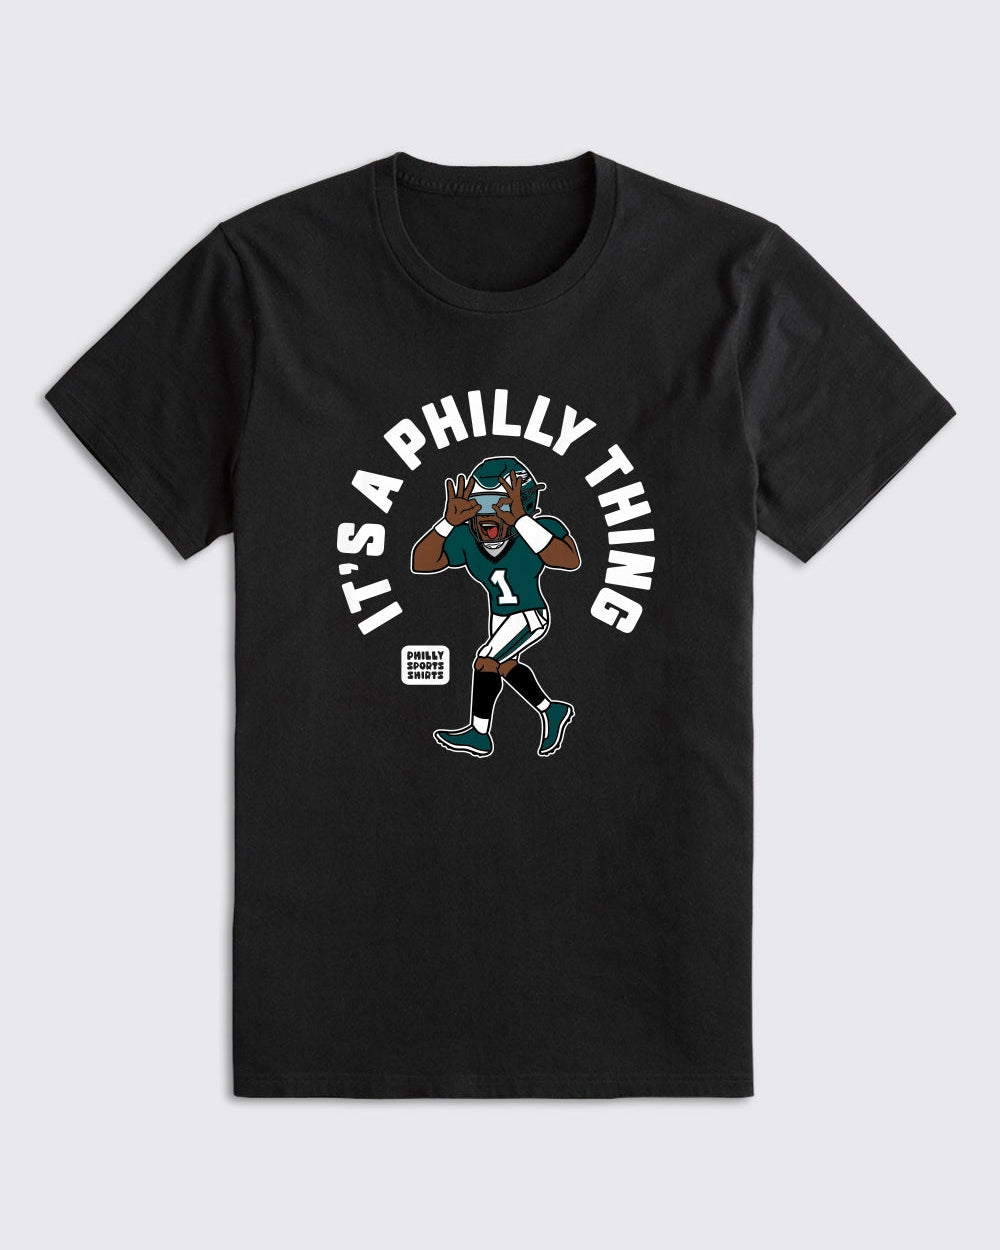 Philadelphia Eagles-It's A Philly Thing Shirt-Black-Philly Sports Shirts